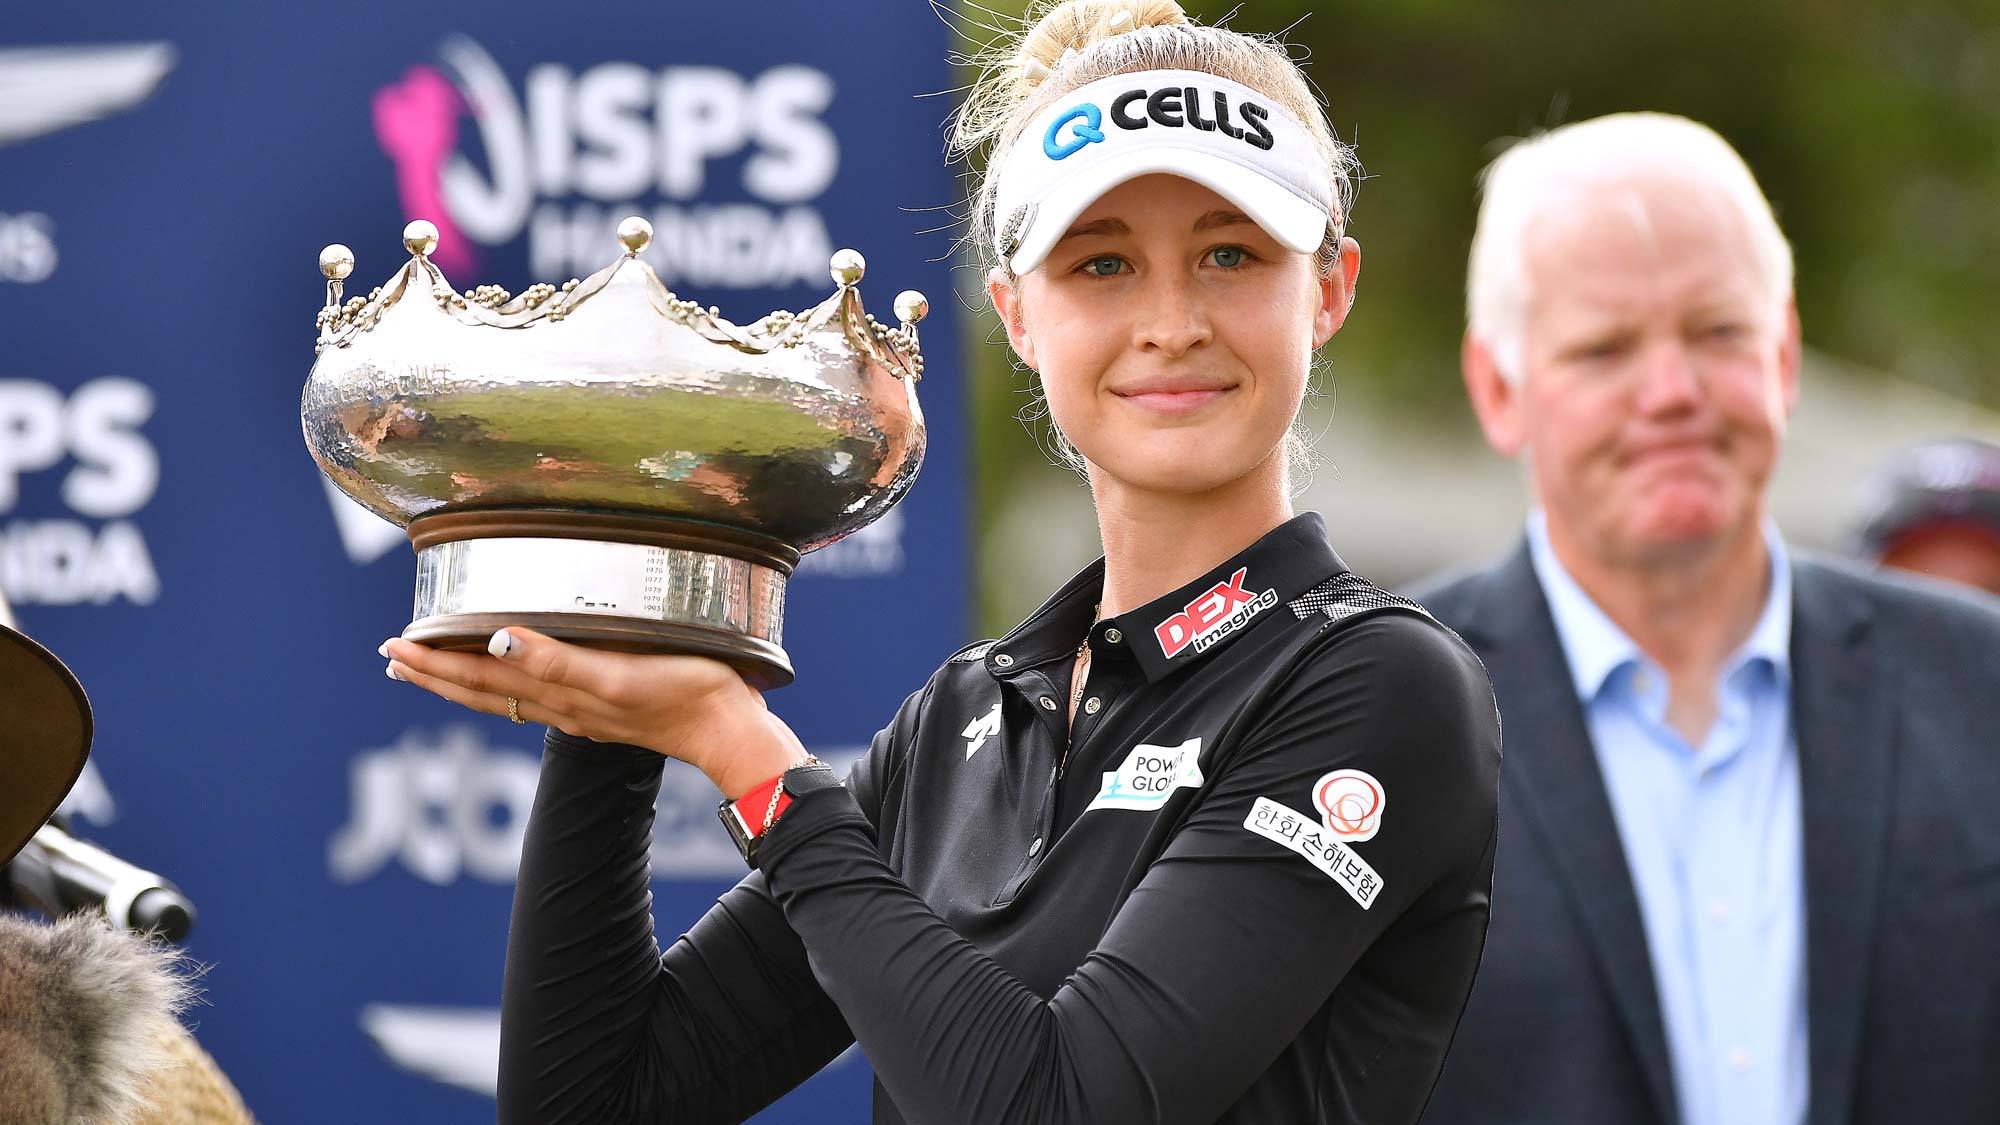 Nelly Korda of the United States poses with the trophy she won at the 2019 ISPS Handa Women's Australian Open